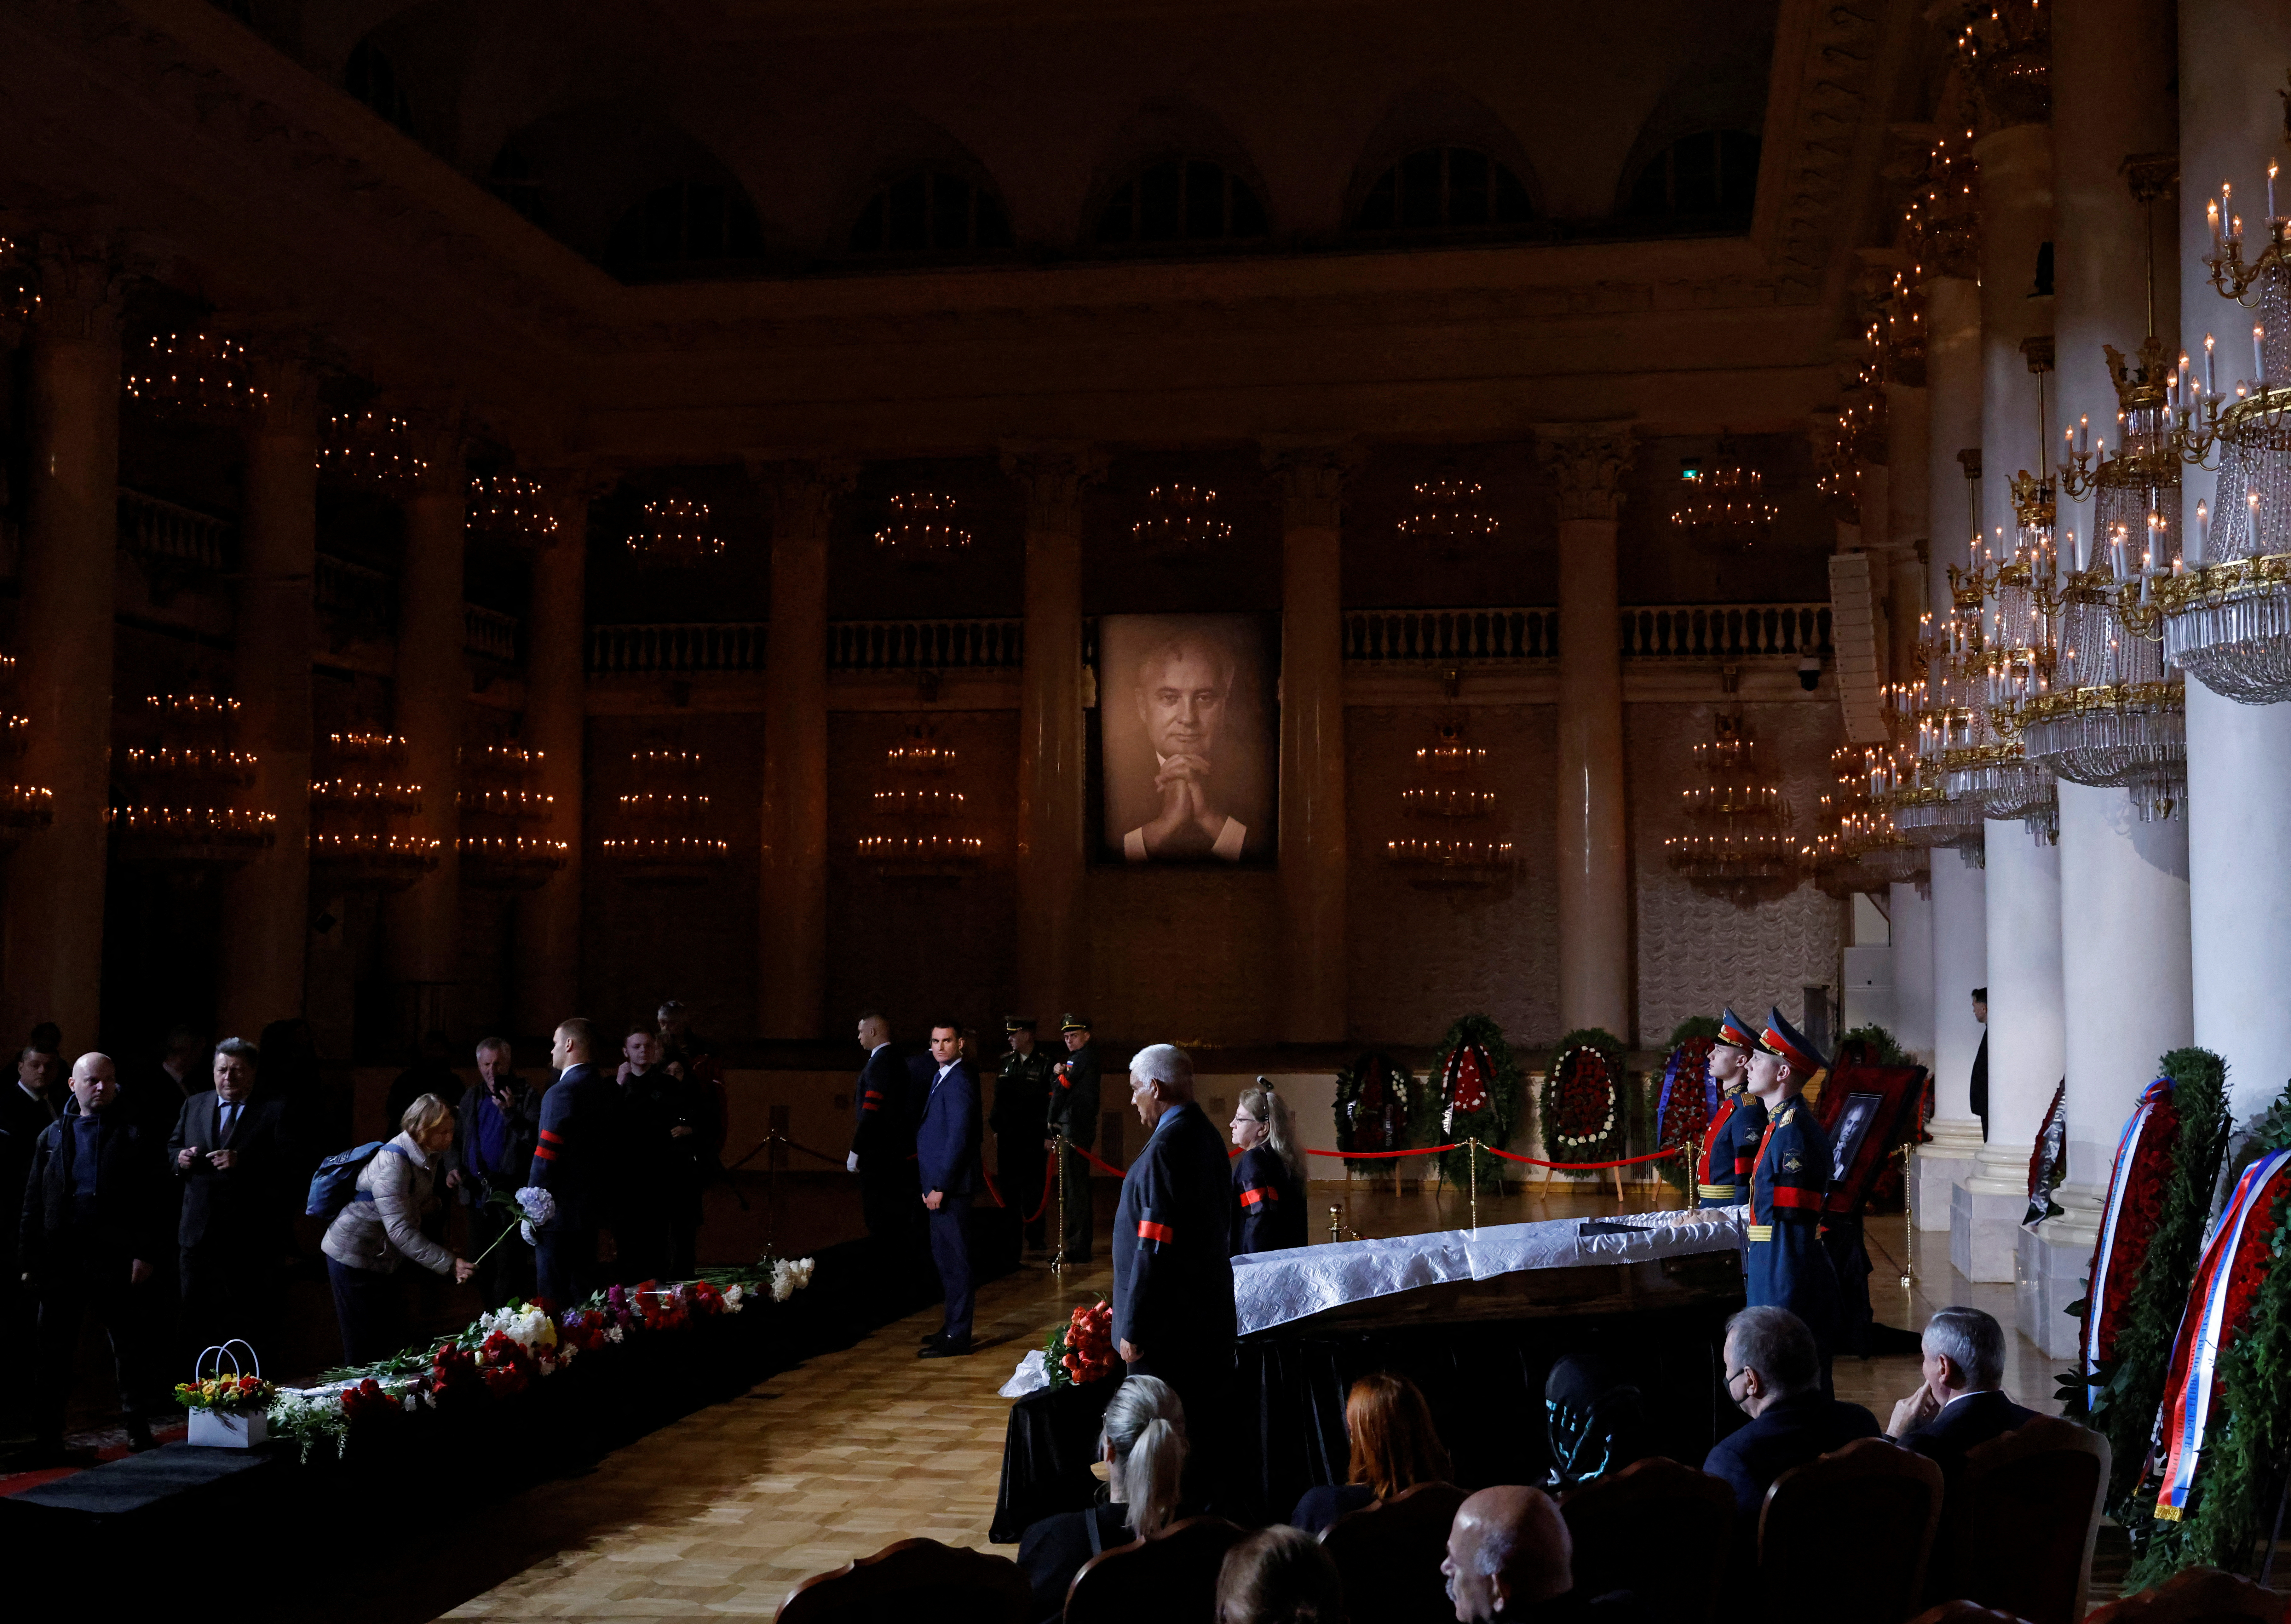 Memorial service for the Soviet Union's last leader Mikhail Gorbachev in Moscow